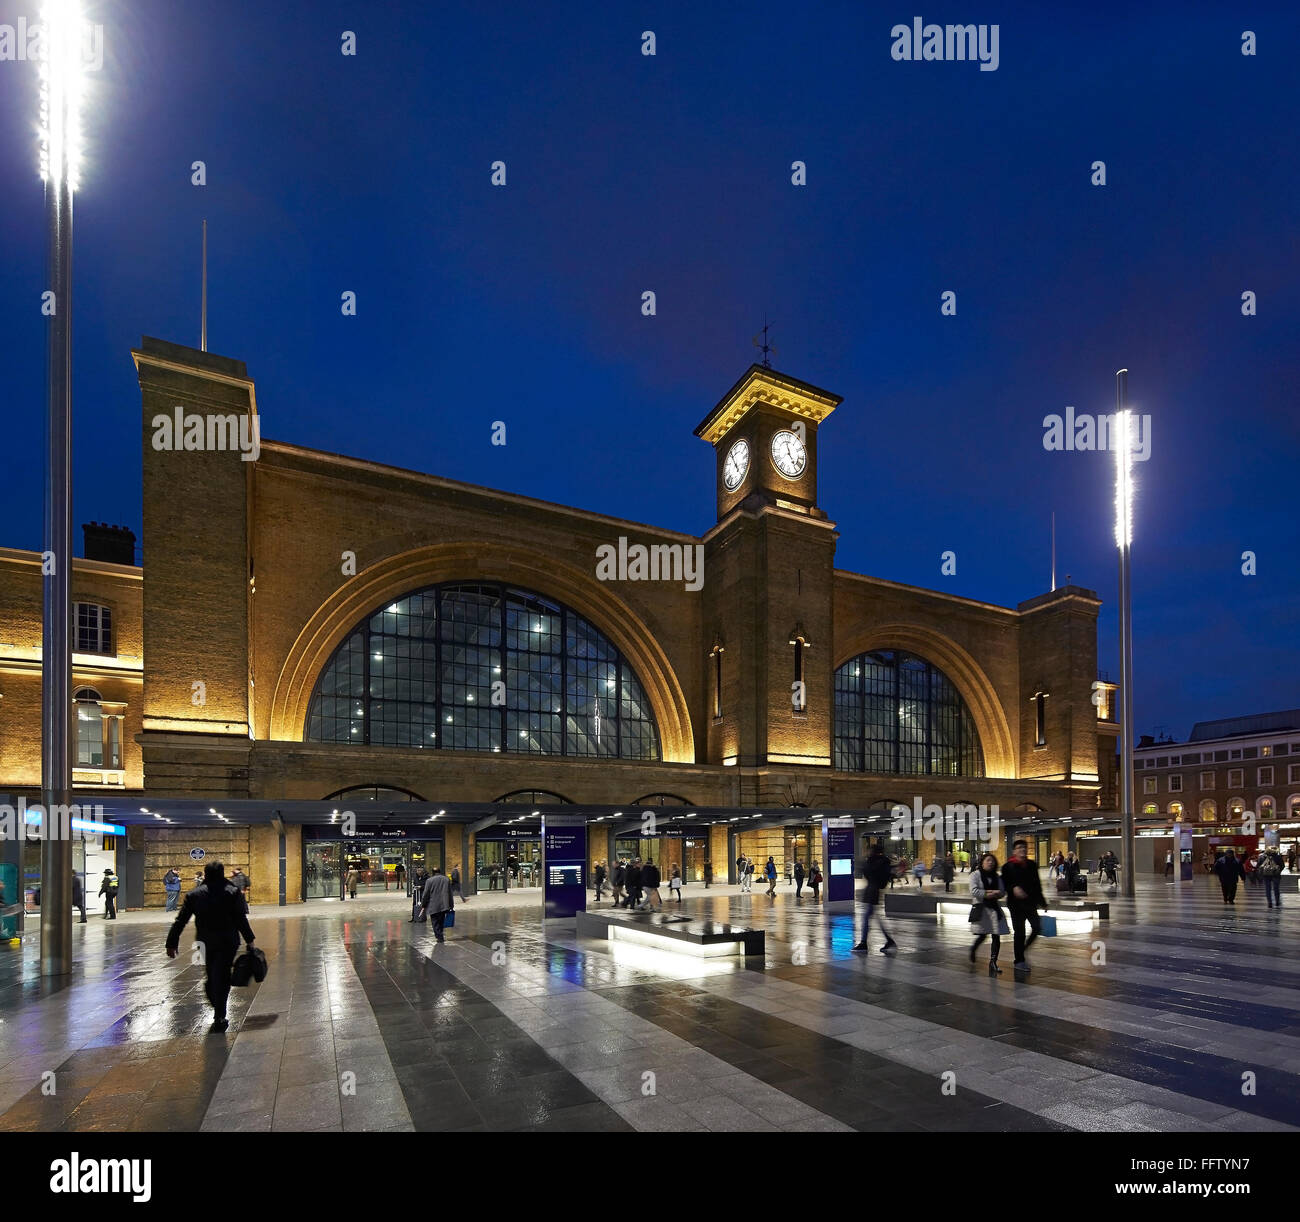 Oblique elevation of square and historic station at night. King's Cross Square, London, United Kingdom. Architect: Stanton Willi Stock Photo